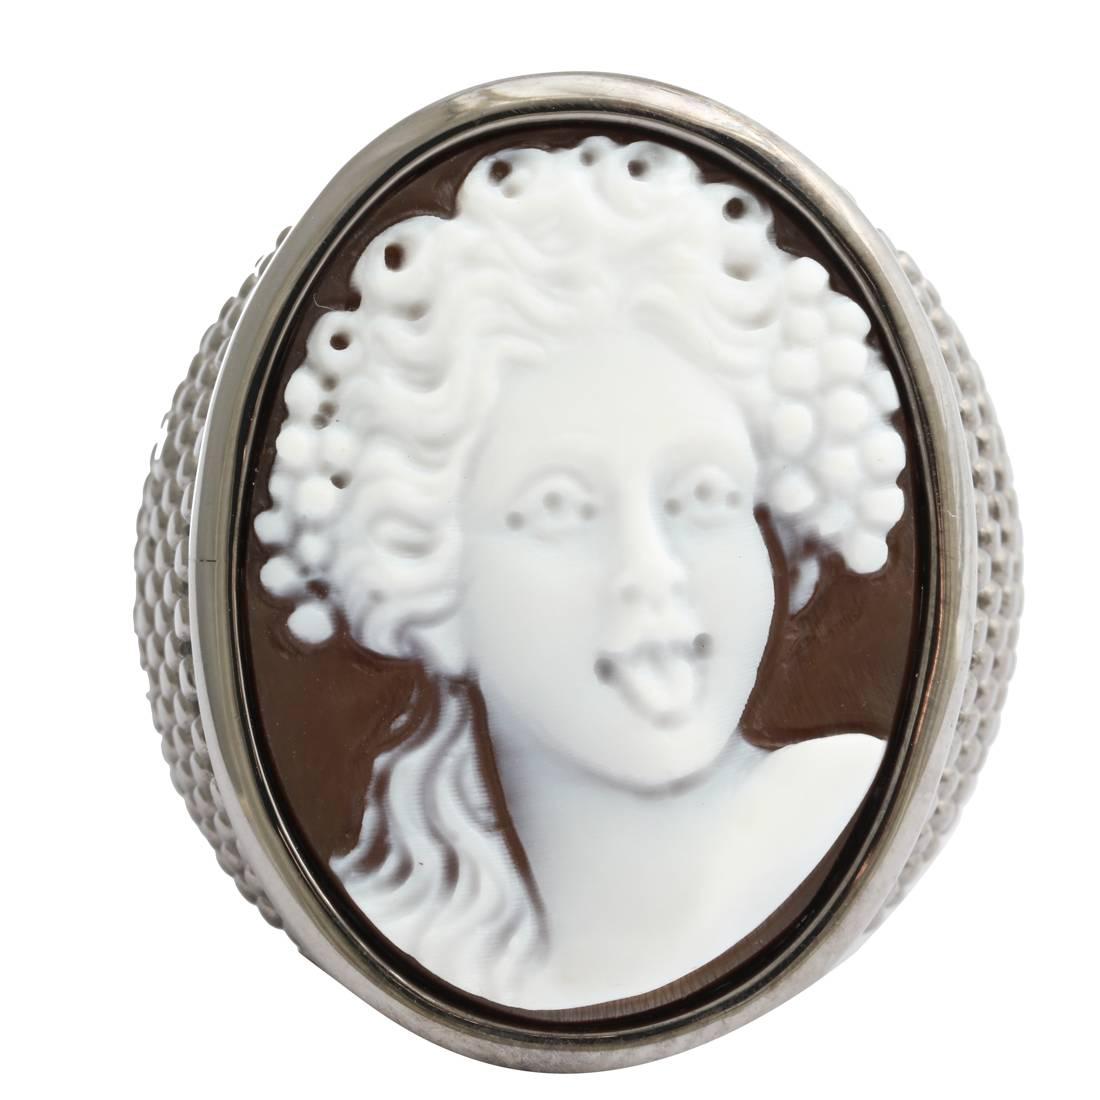 25mm sardonyx shell cameo hand-carved, set in sterling silver black rhodium plated ring.
Ring Size: US7

*Being these are hand crafted one of a kind designs, not all ring sizes might be immediately available. We offer custom sizing free of charge.